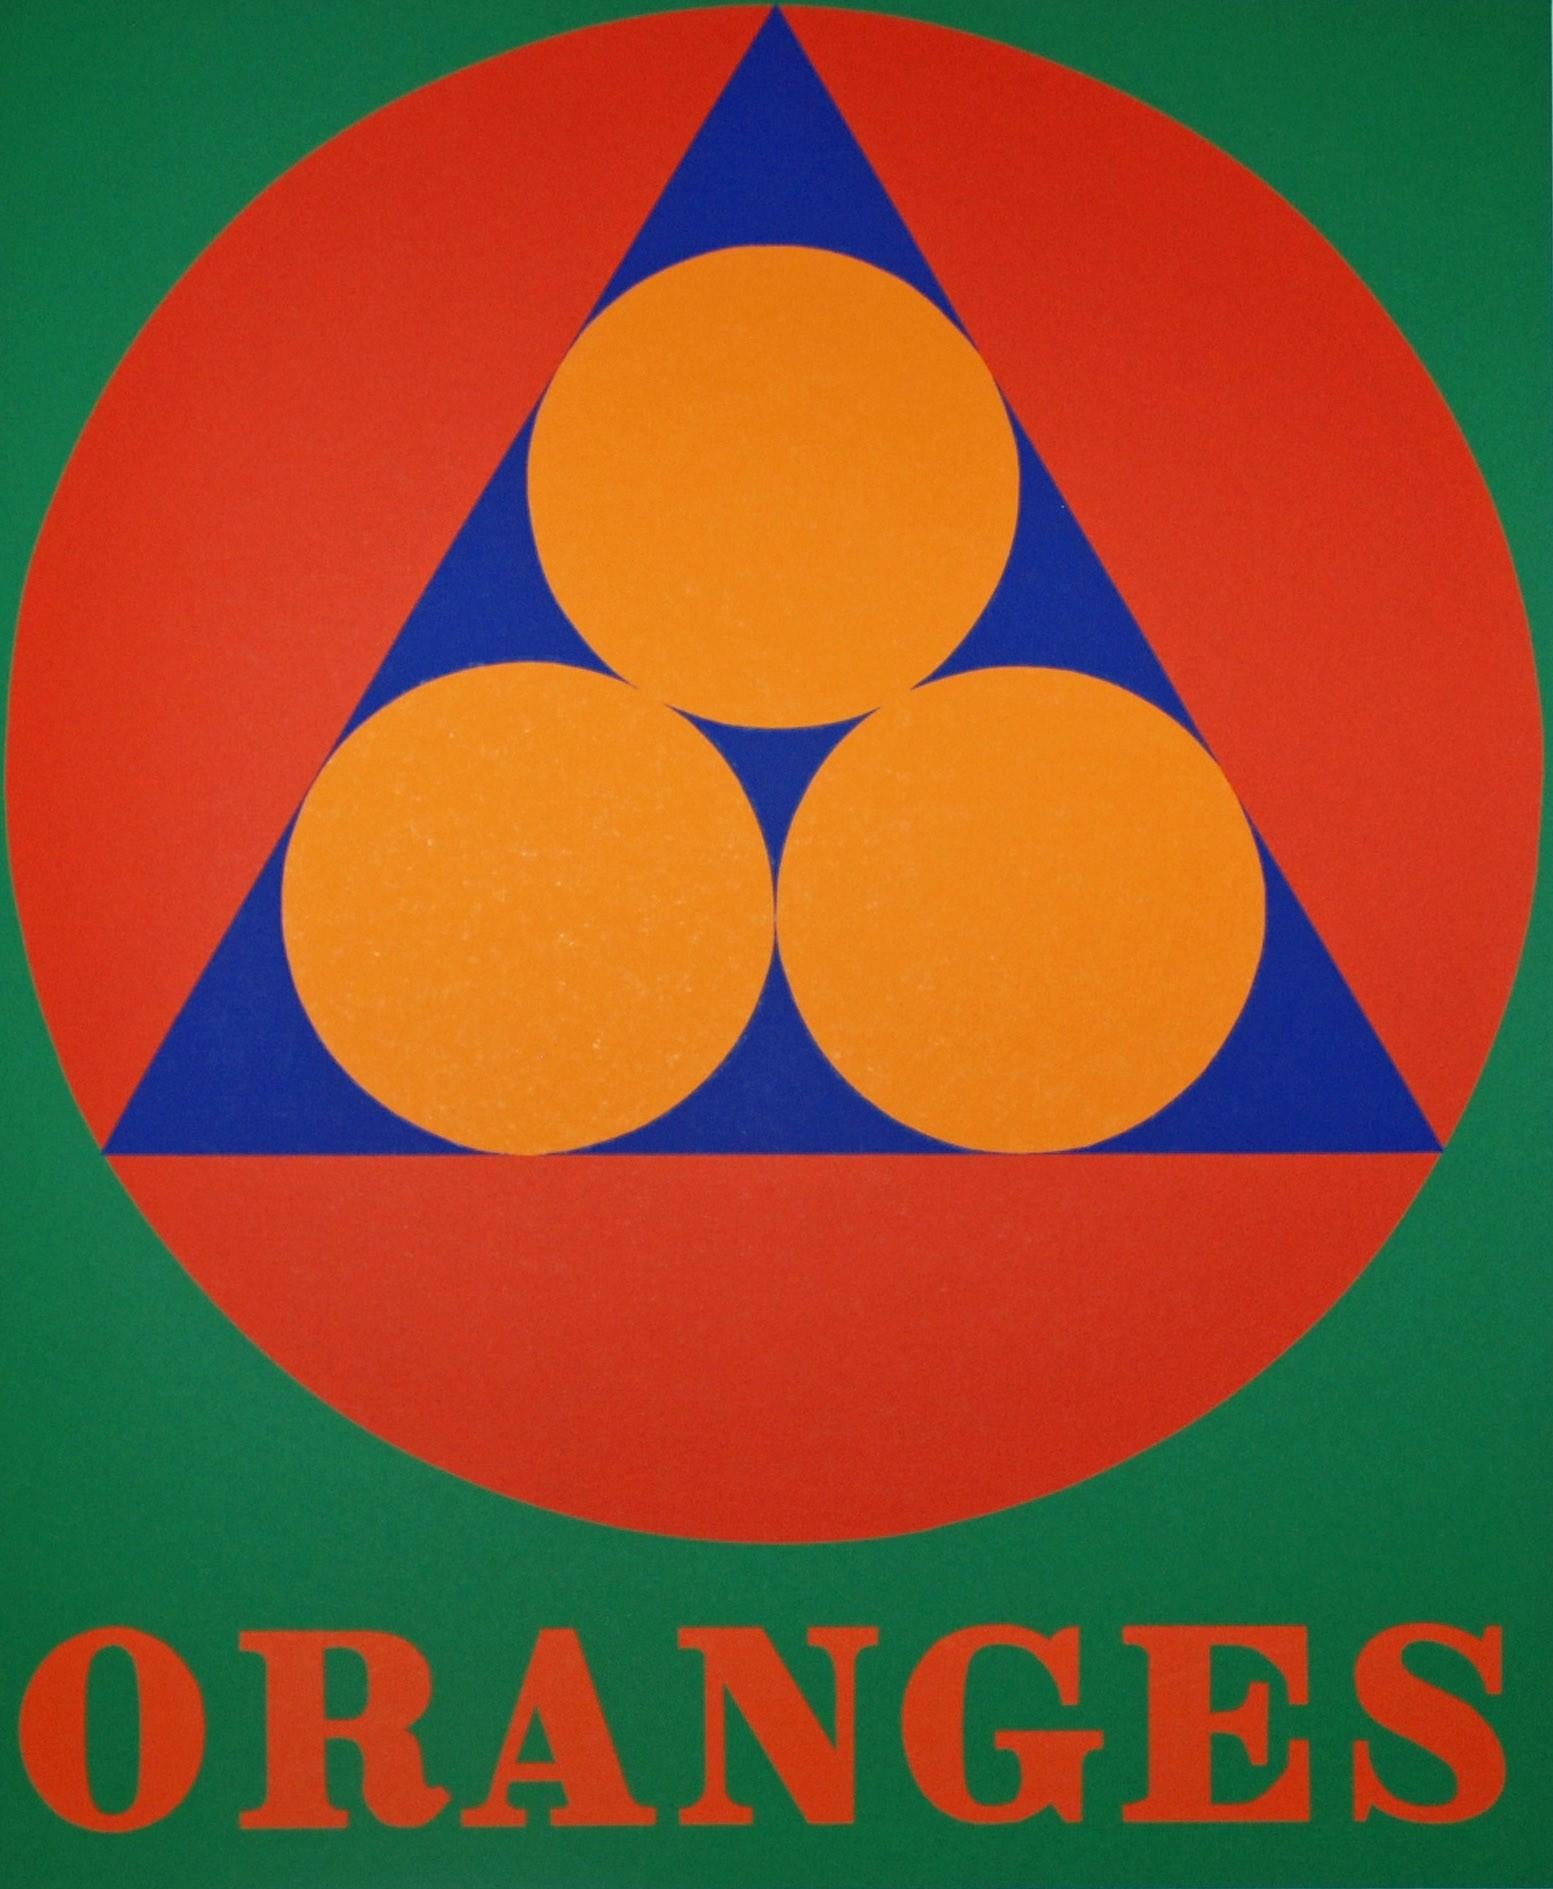 Robert Indiana Abstract Print - Oranges, from The American Dream